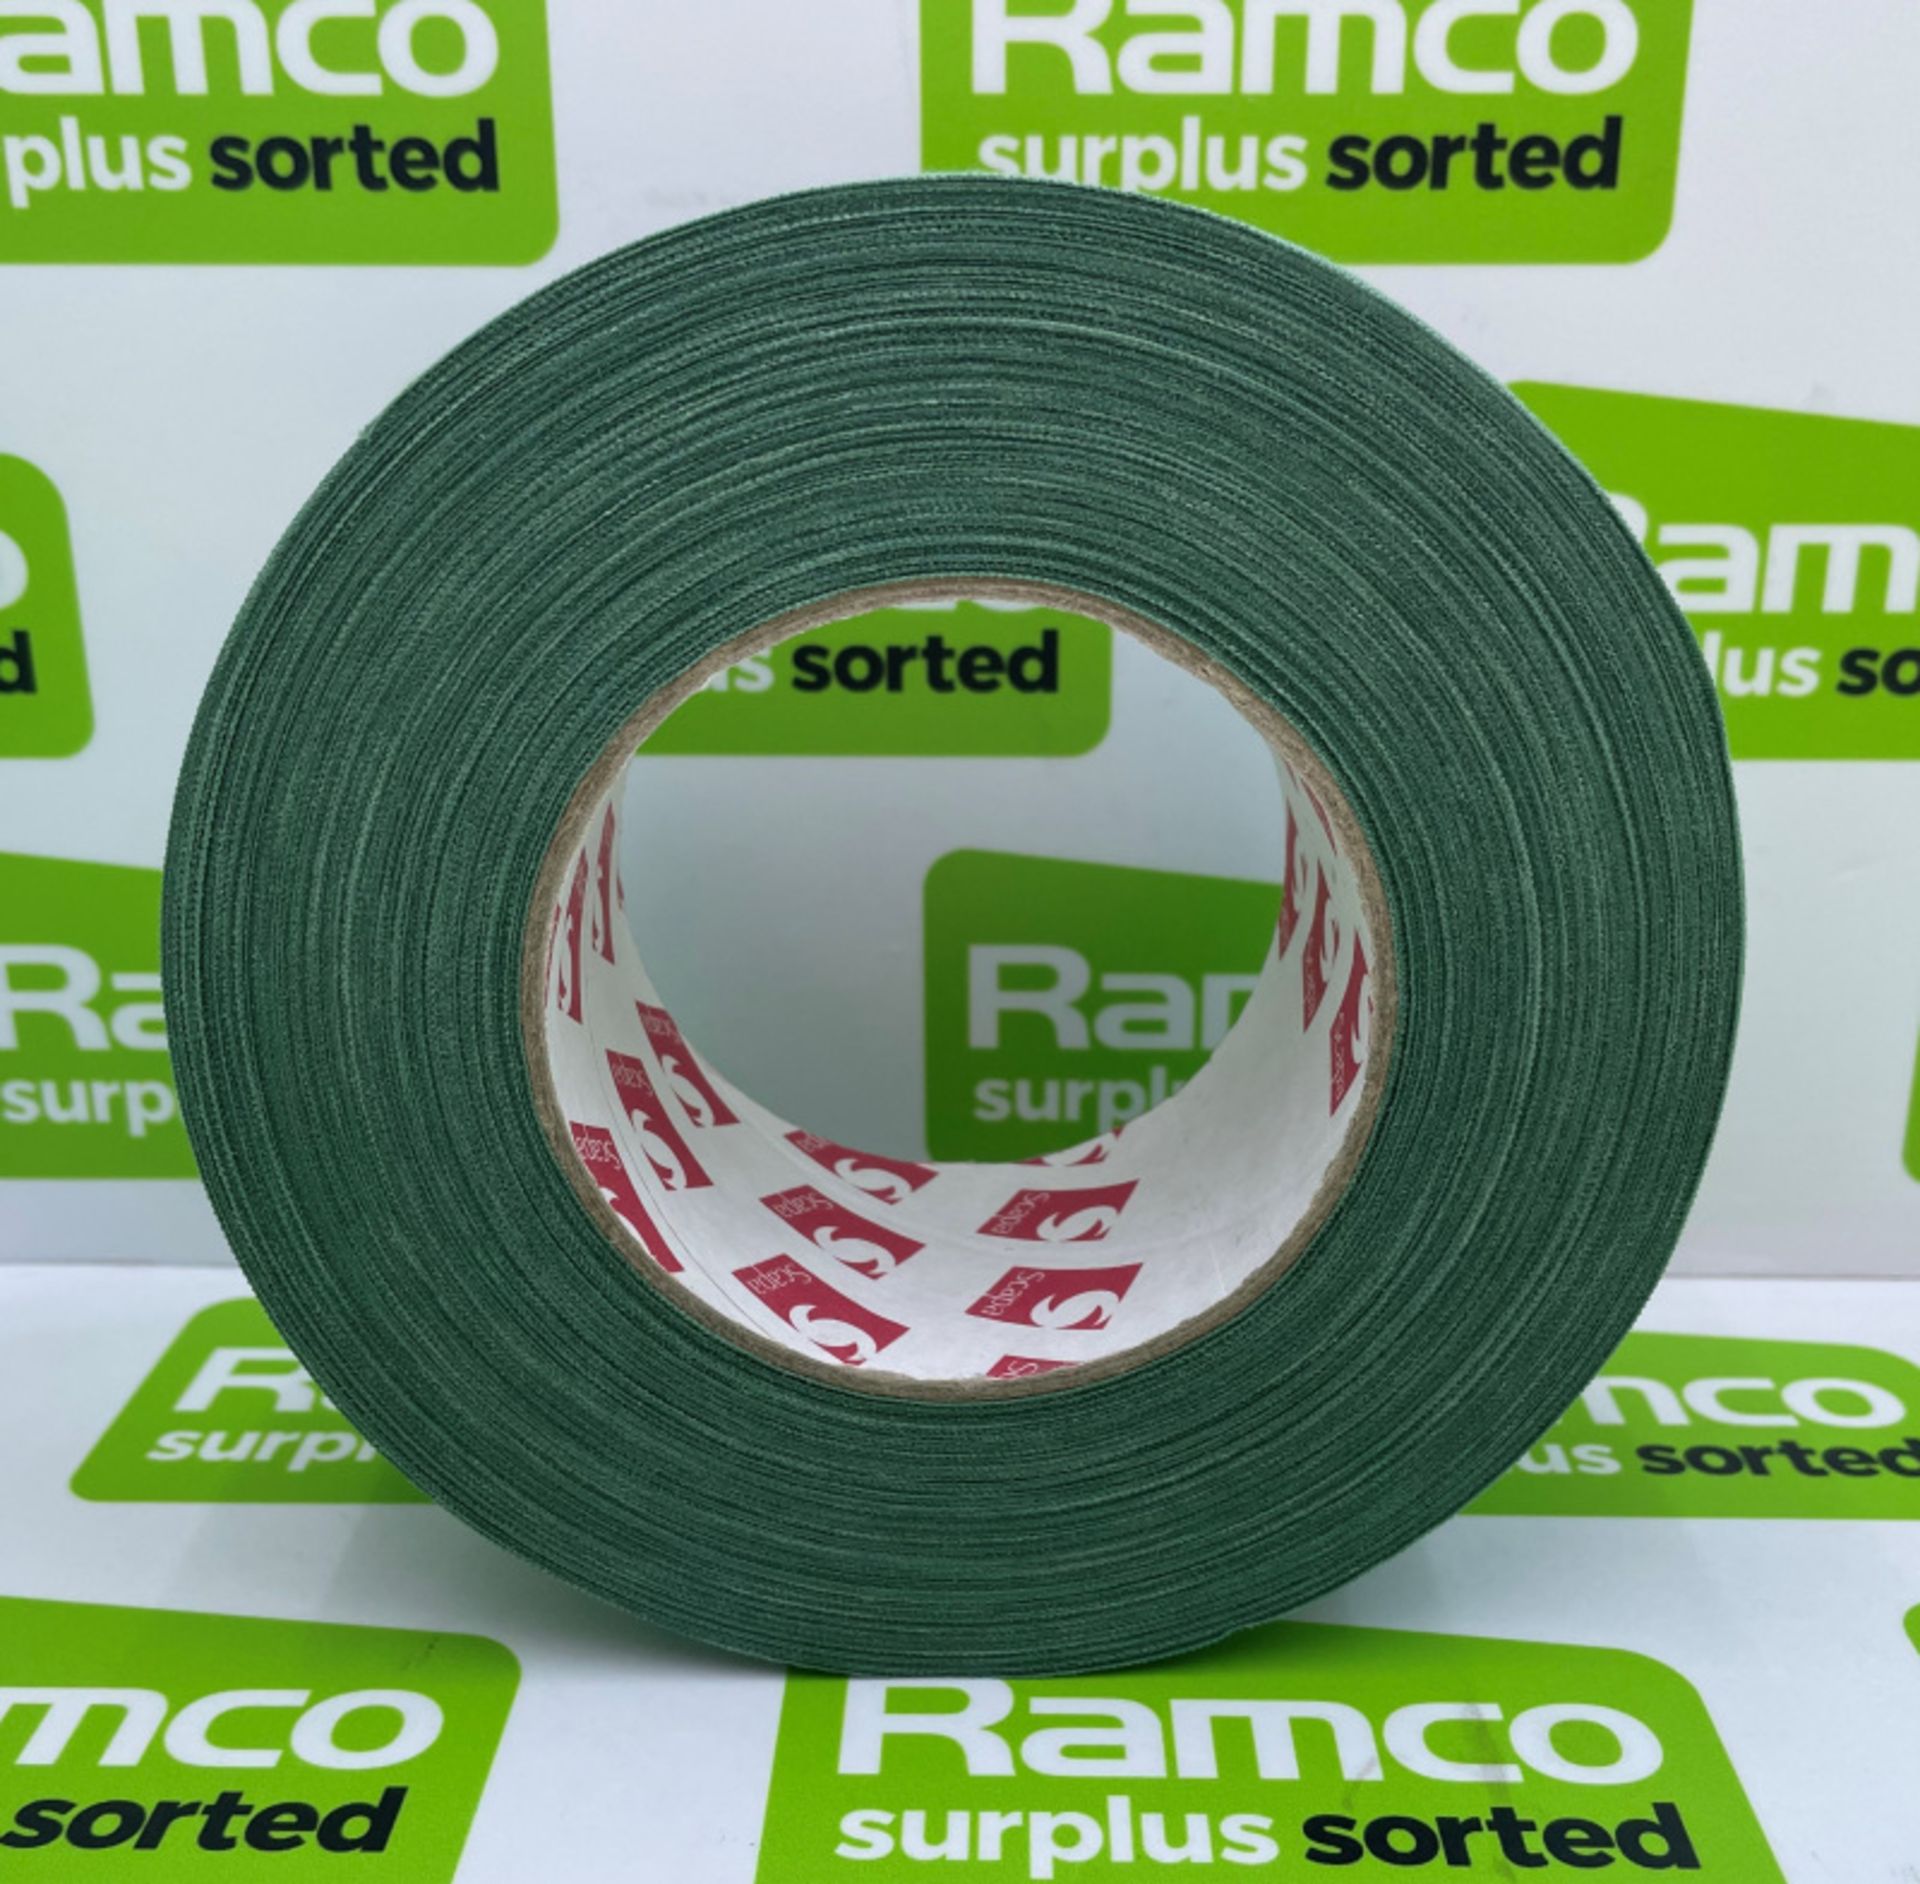 Scapa 3302 Tape - Olive Green - 50mm x 50M rolls - 16 rolls per box - 48 boxes - Image 3 of 5